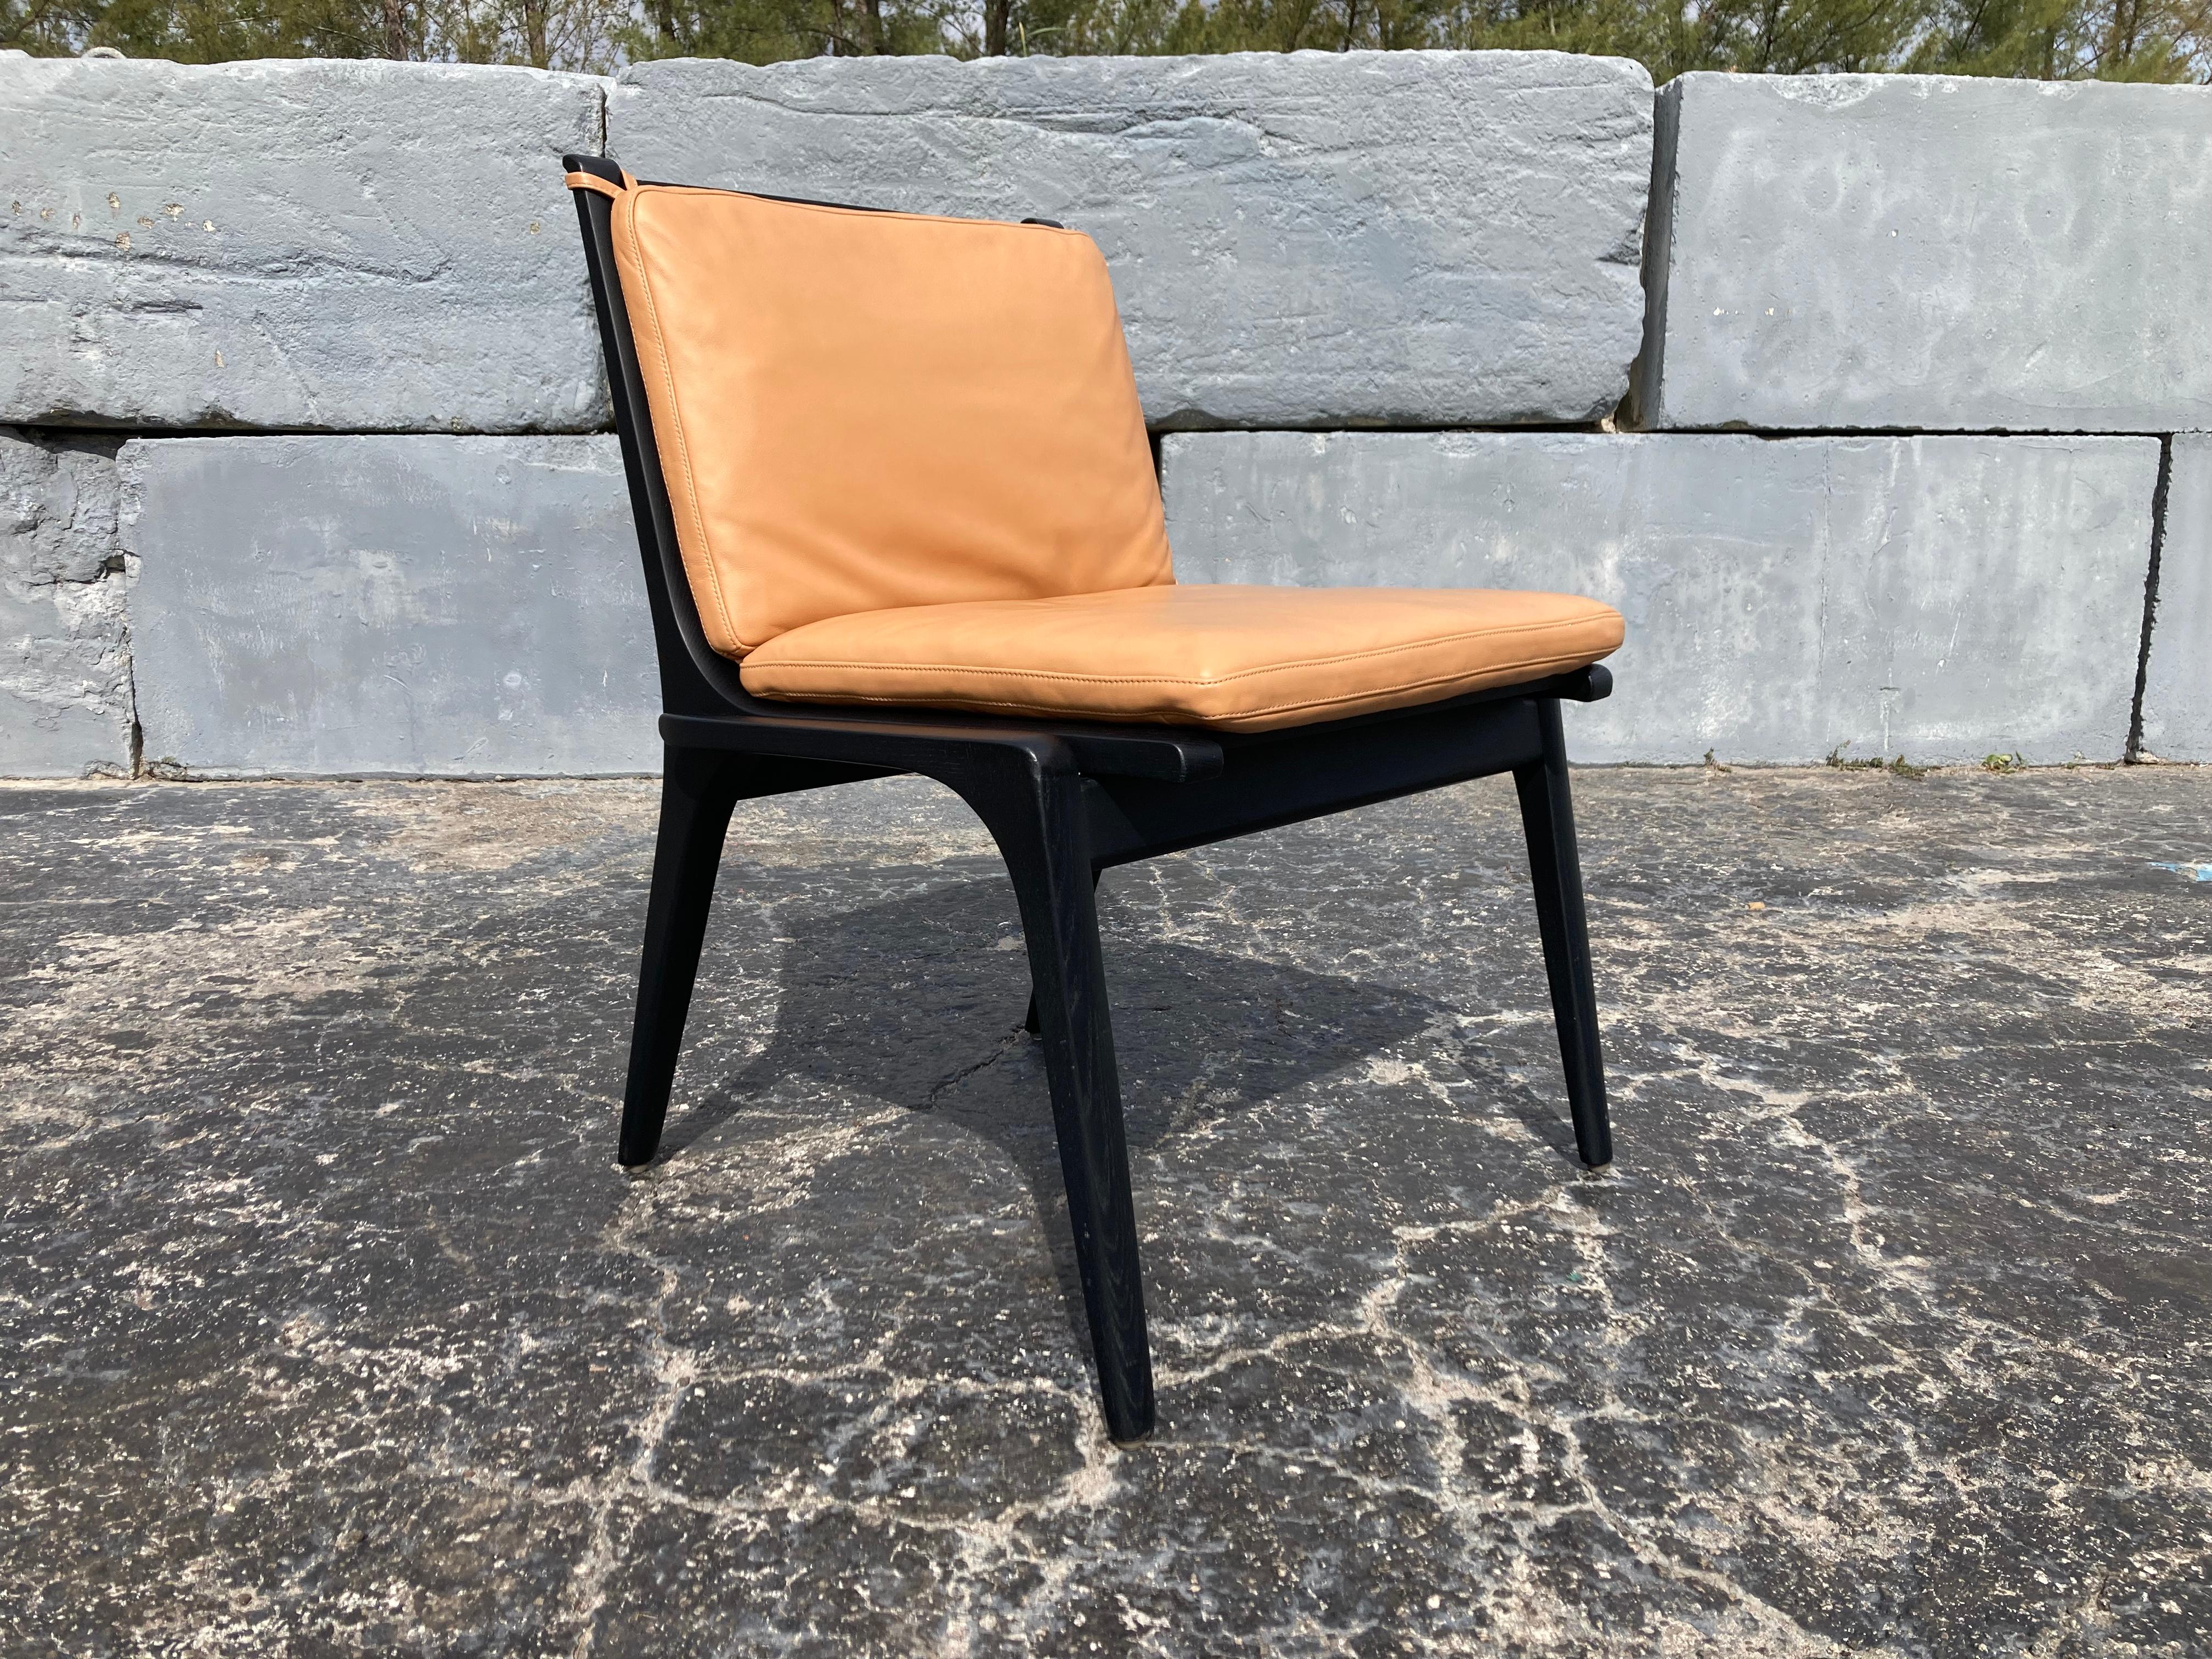 Rén Side Chair from Stellar Works designed by Space Copenhagen, Oak, Leather. Matching sofa available.